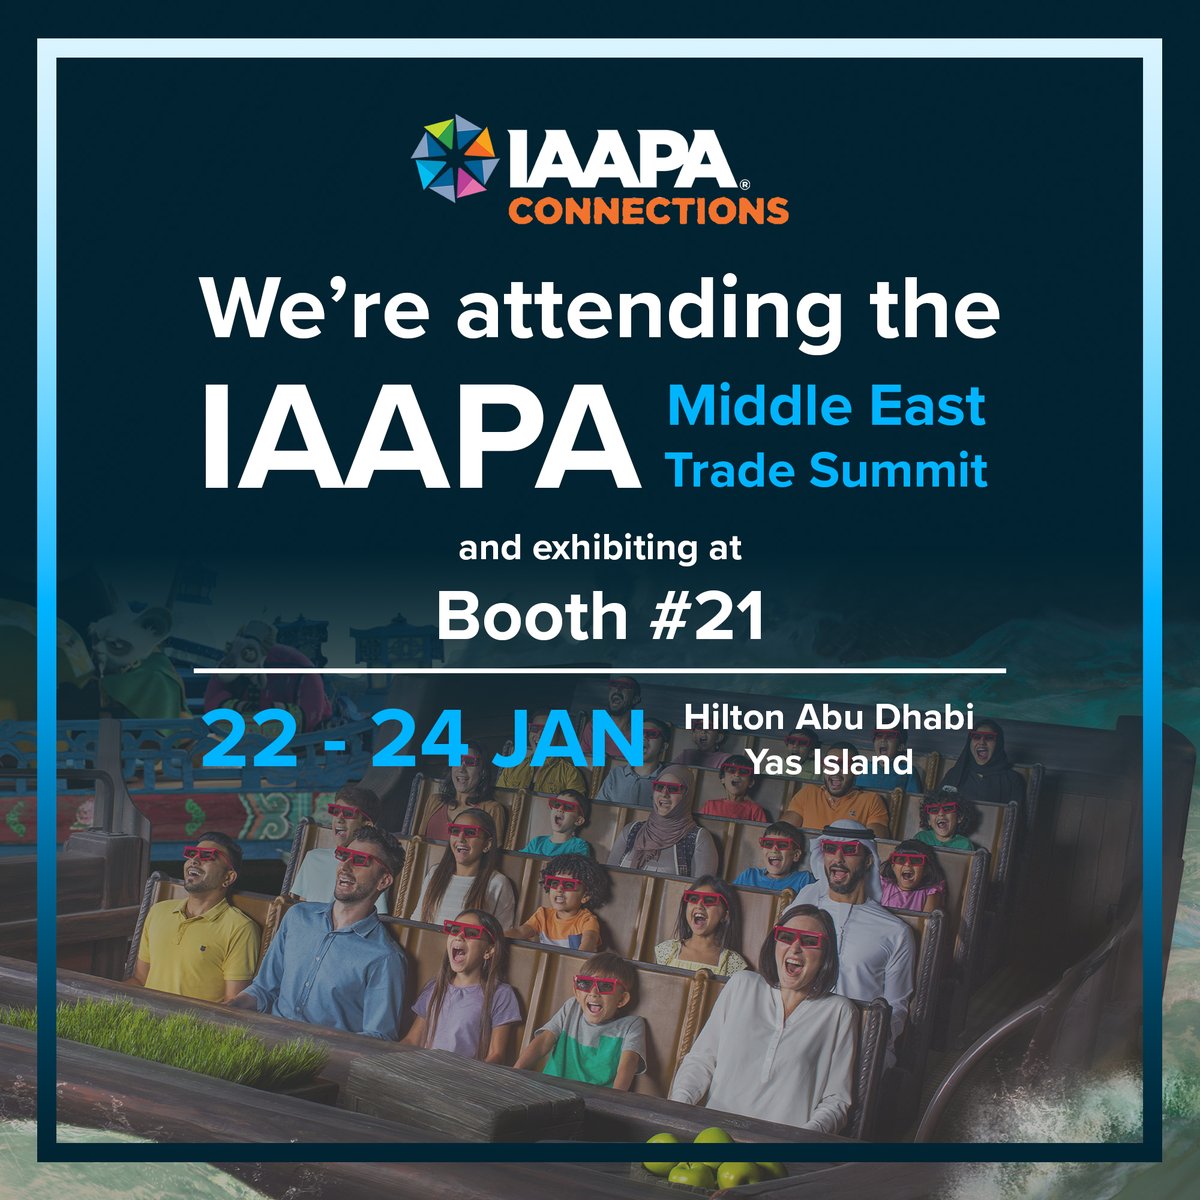 Starting off the New Year with a bang, we're ready to get stuck into the @IAAPAEMEA Middle Eastern Trade Summit in Abu Dhabi. Our CEO, Terry Monkton, will be in attendance as the delegates explore the nearby attractions and hear from an array of exciting speakers.